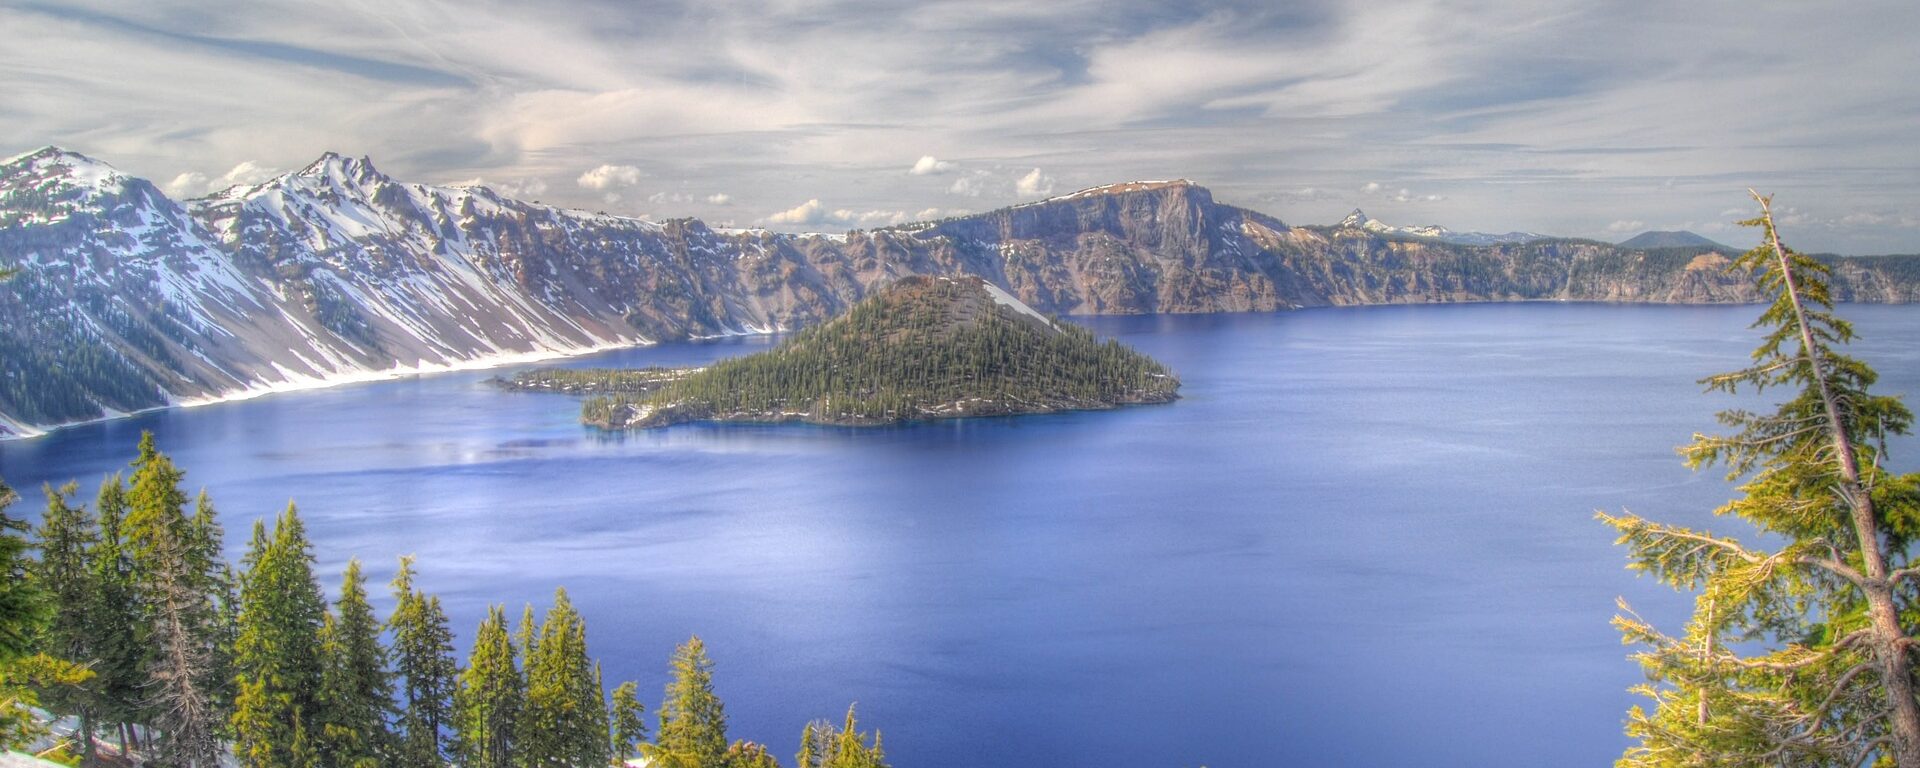 Crater Lake, Oregon. Periwinkle blue water with snow-free trees and ground surrounding the lake.